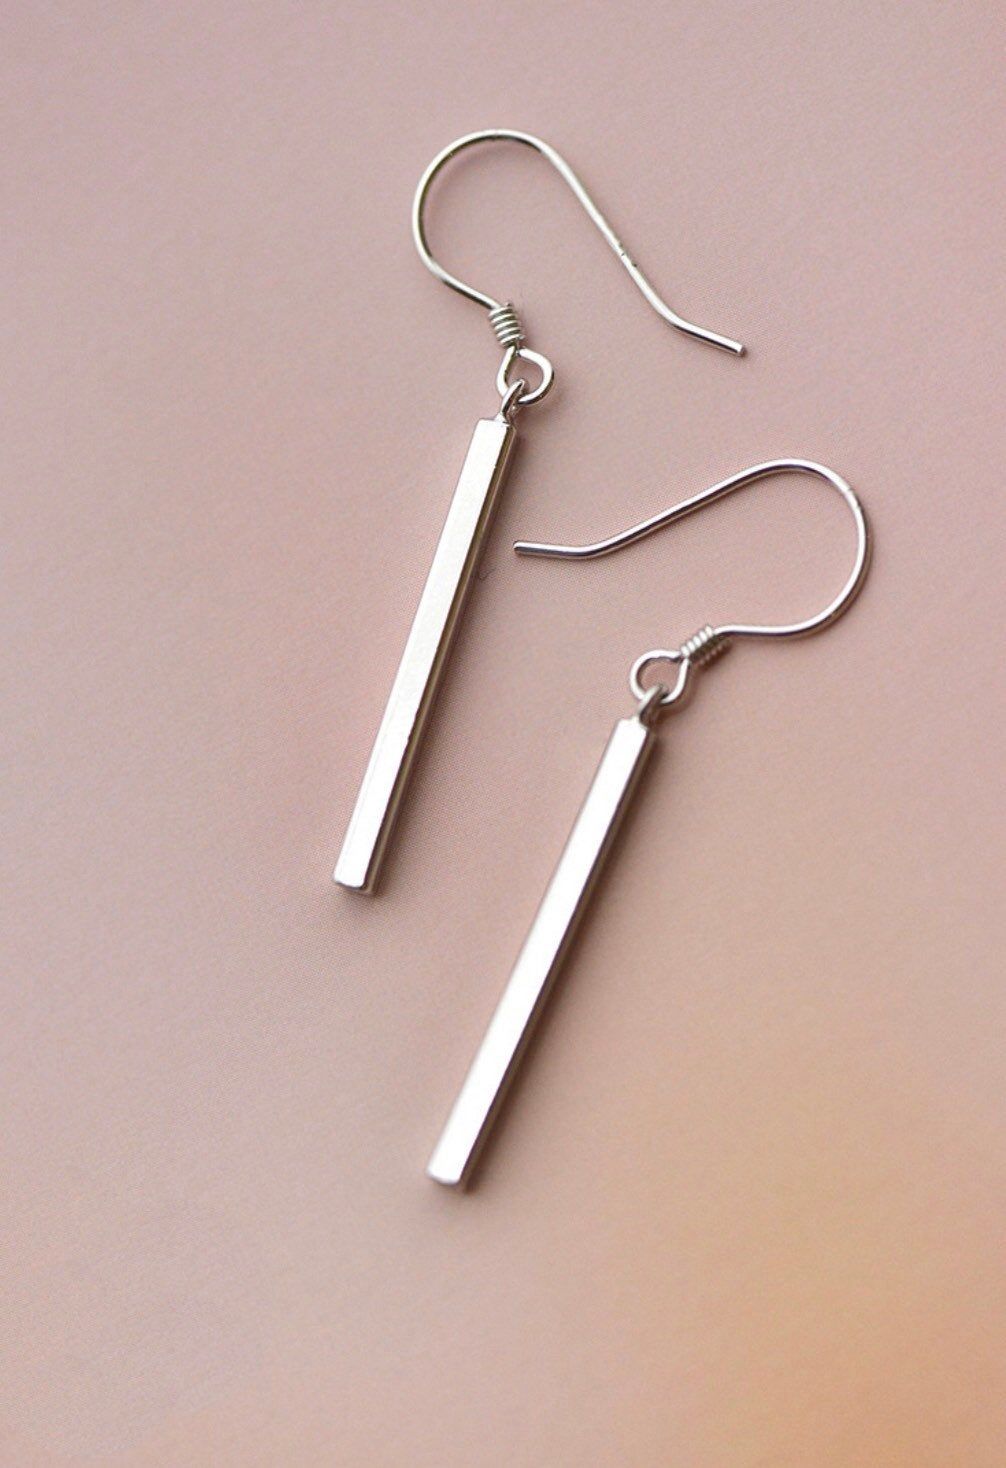 The silver dangle earrings to wear at various occasions